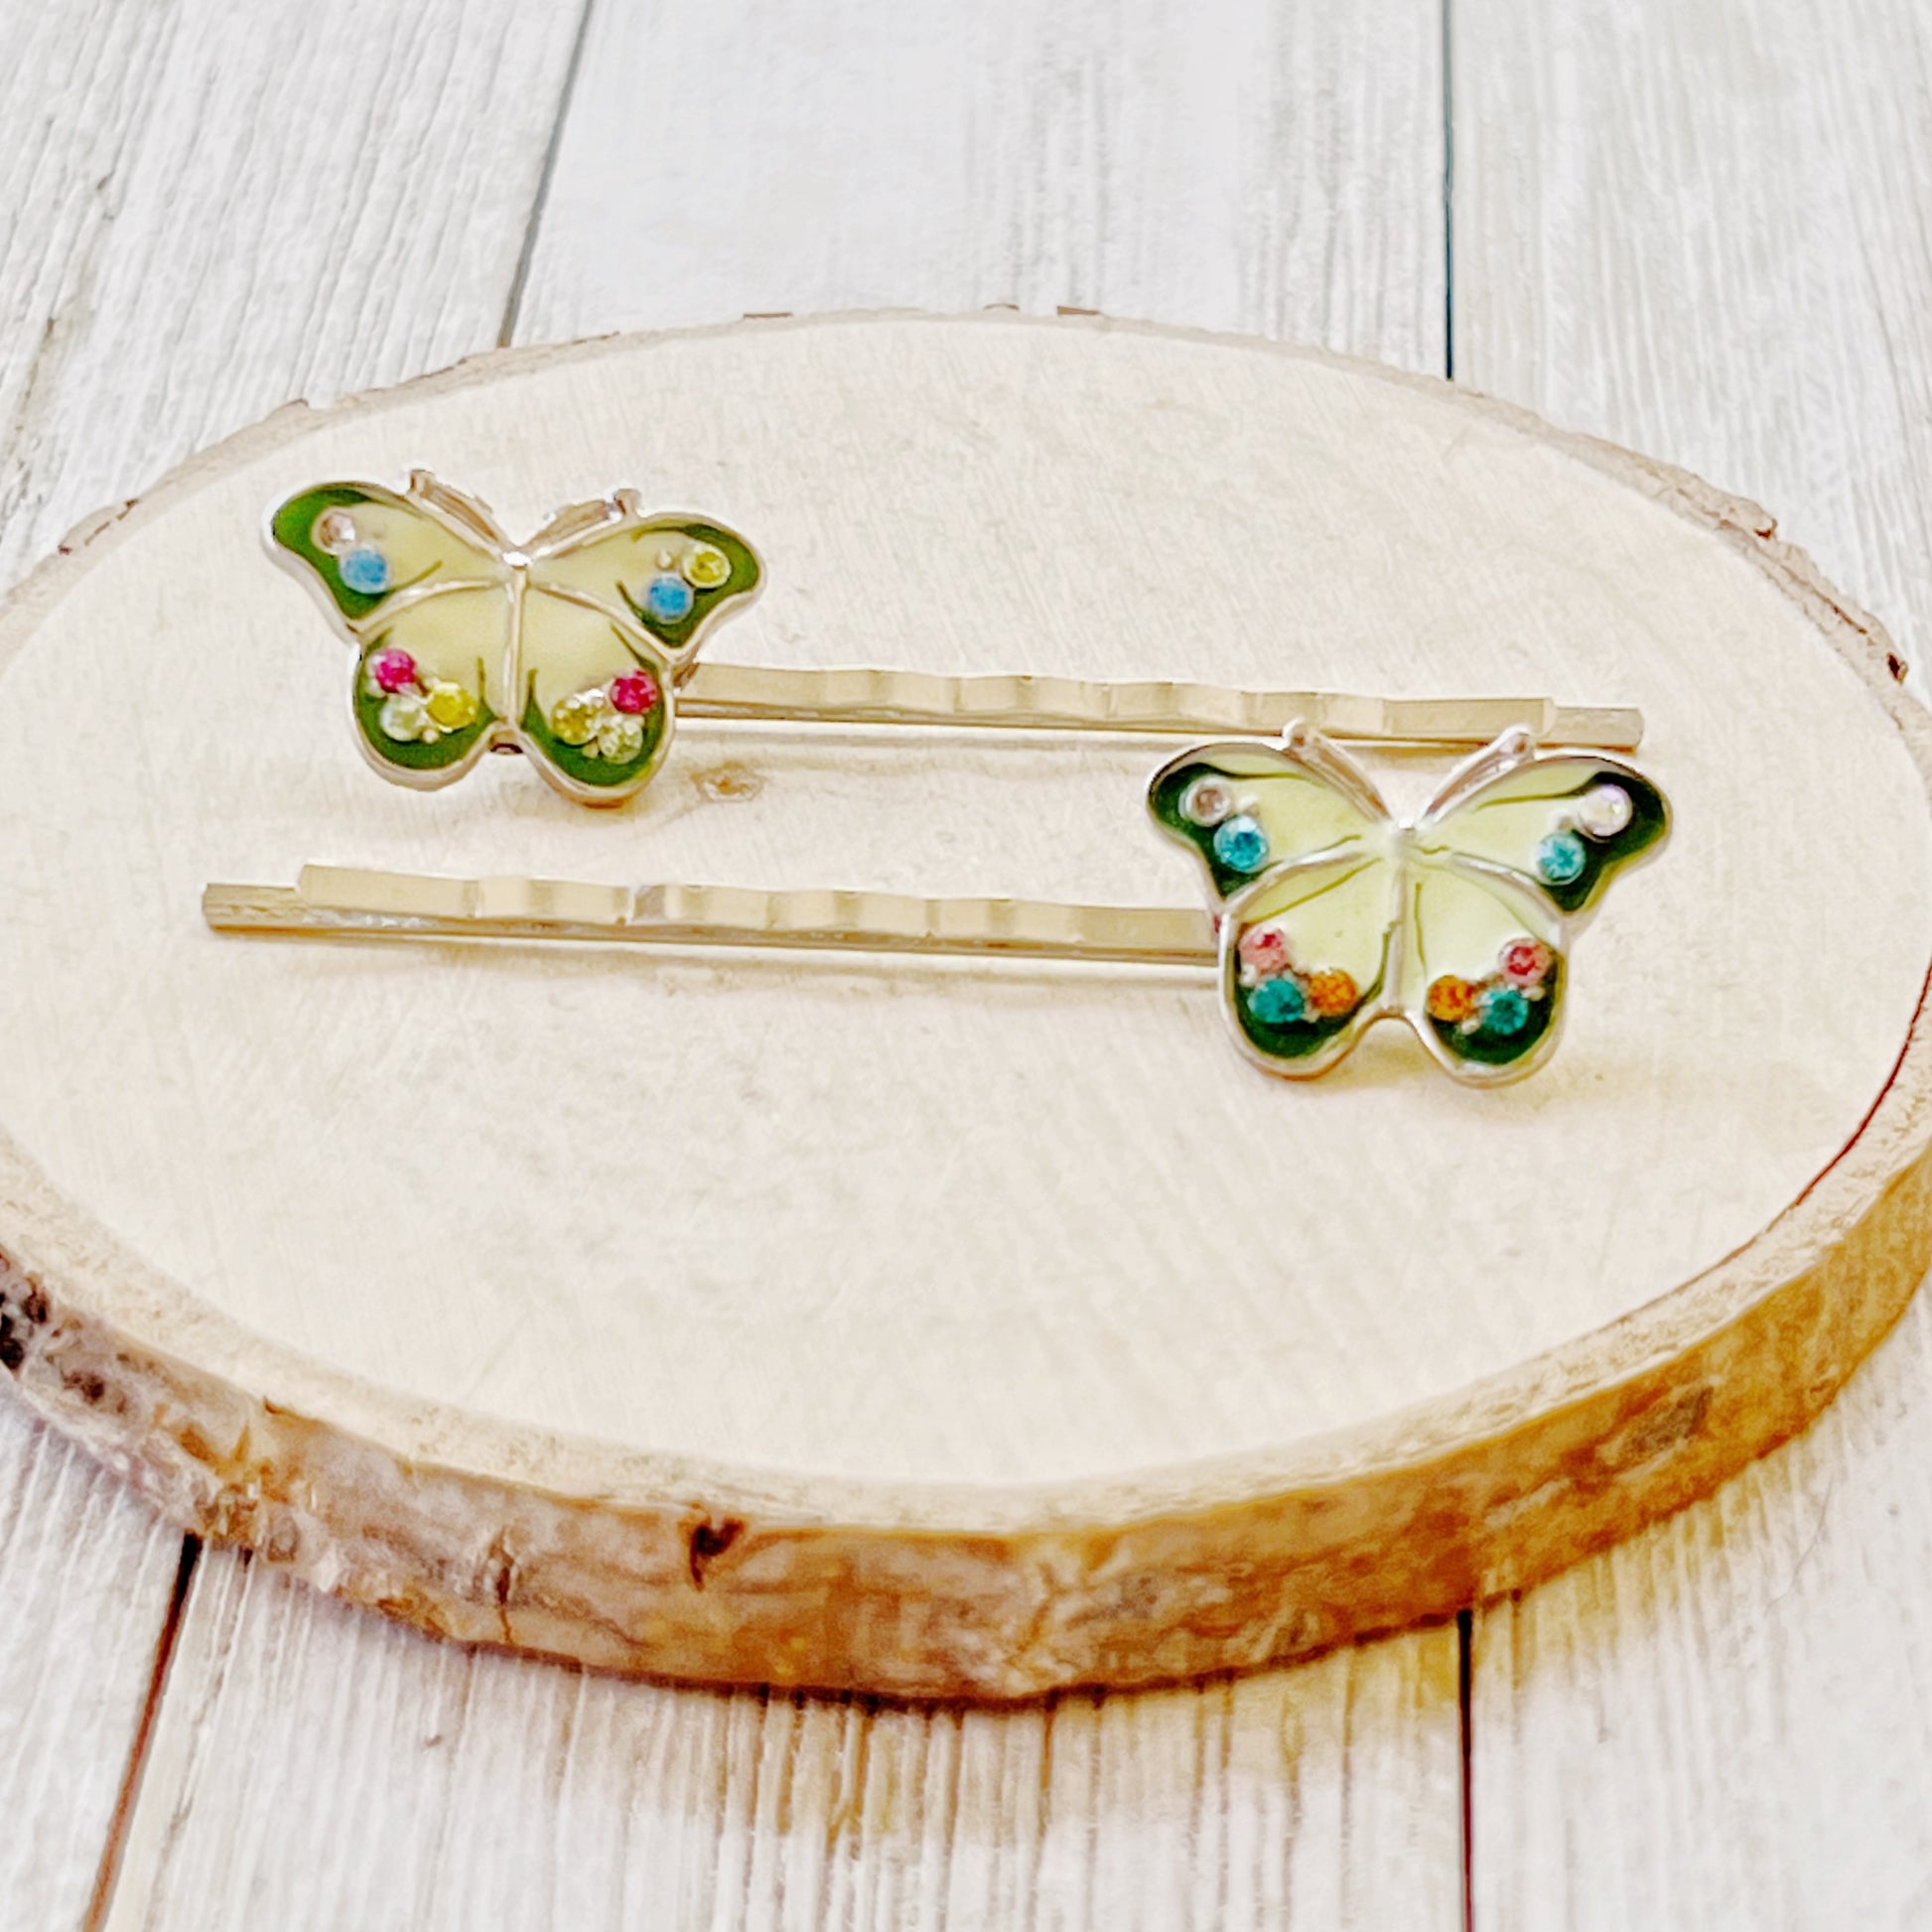 Women’s Green Butterfly Hair Pins - Stunning Multi-Colored Rhinestone Accents for Glamorous Hairstyles